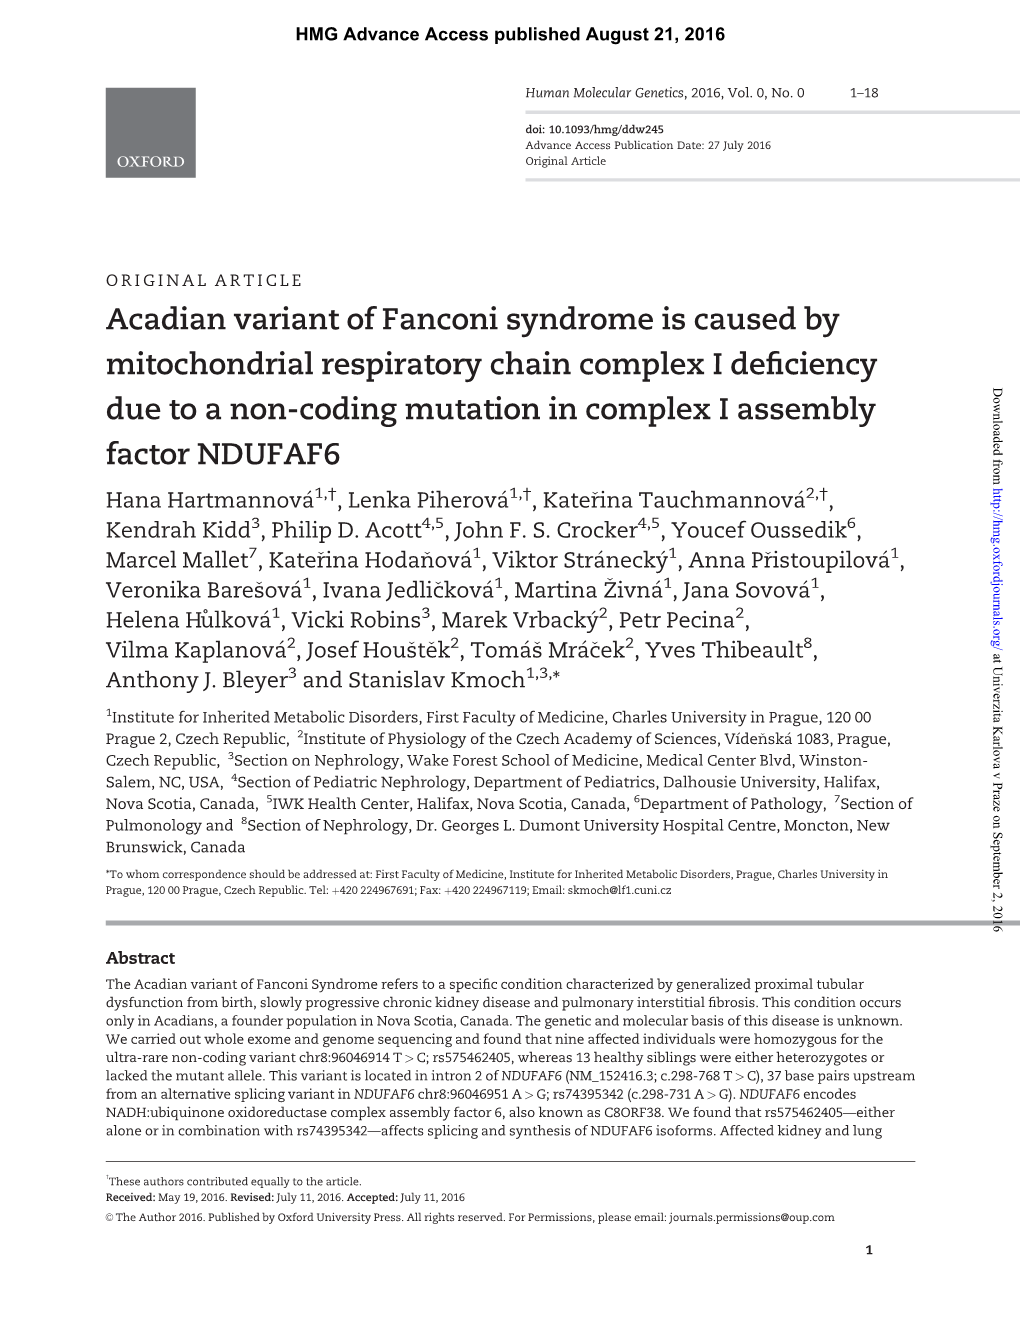 Acadian Variant of Fanconi Syndrome Is Caused by Mitochondrial